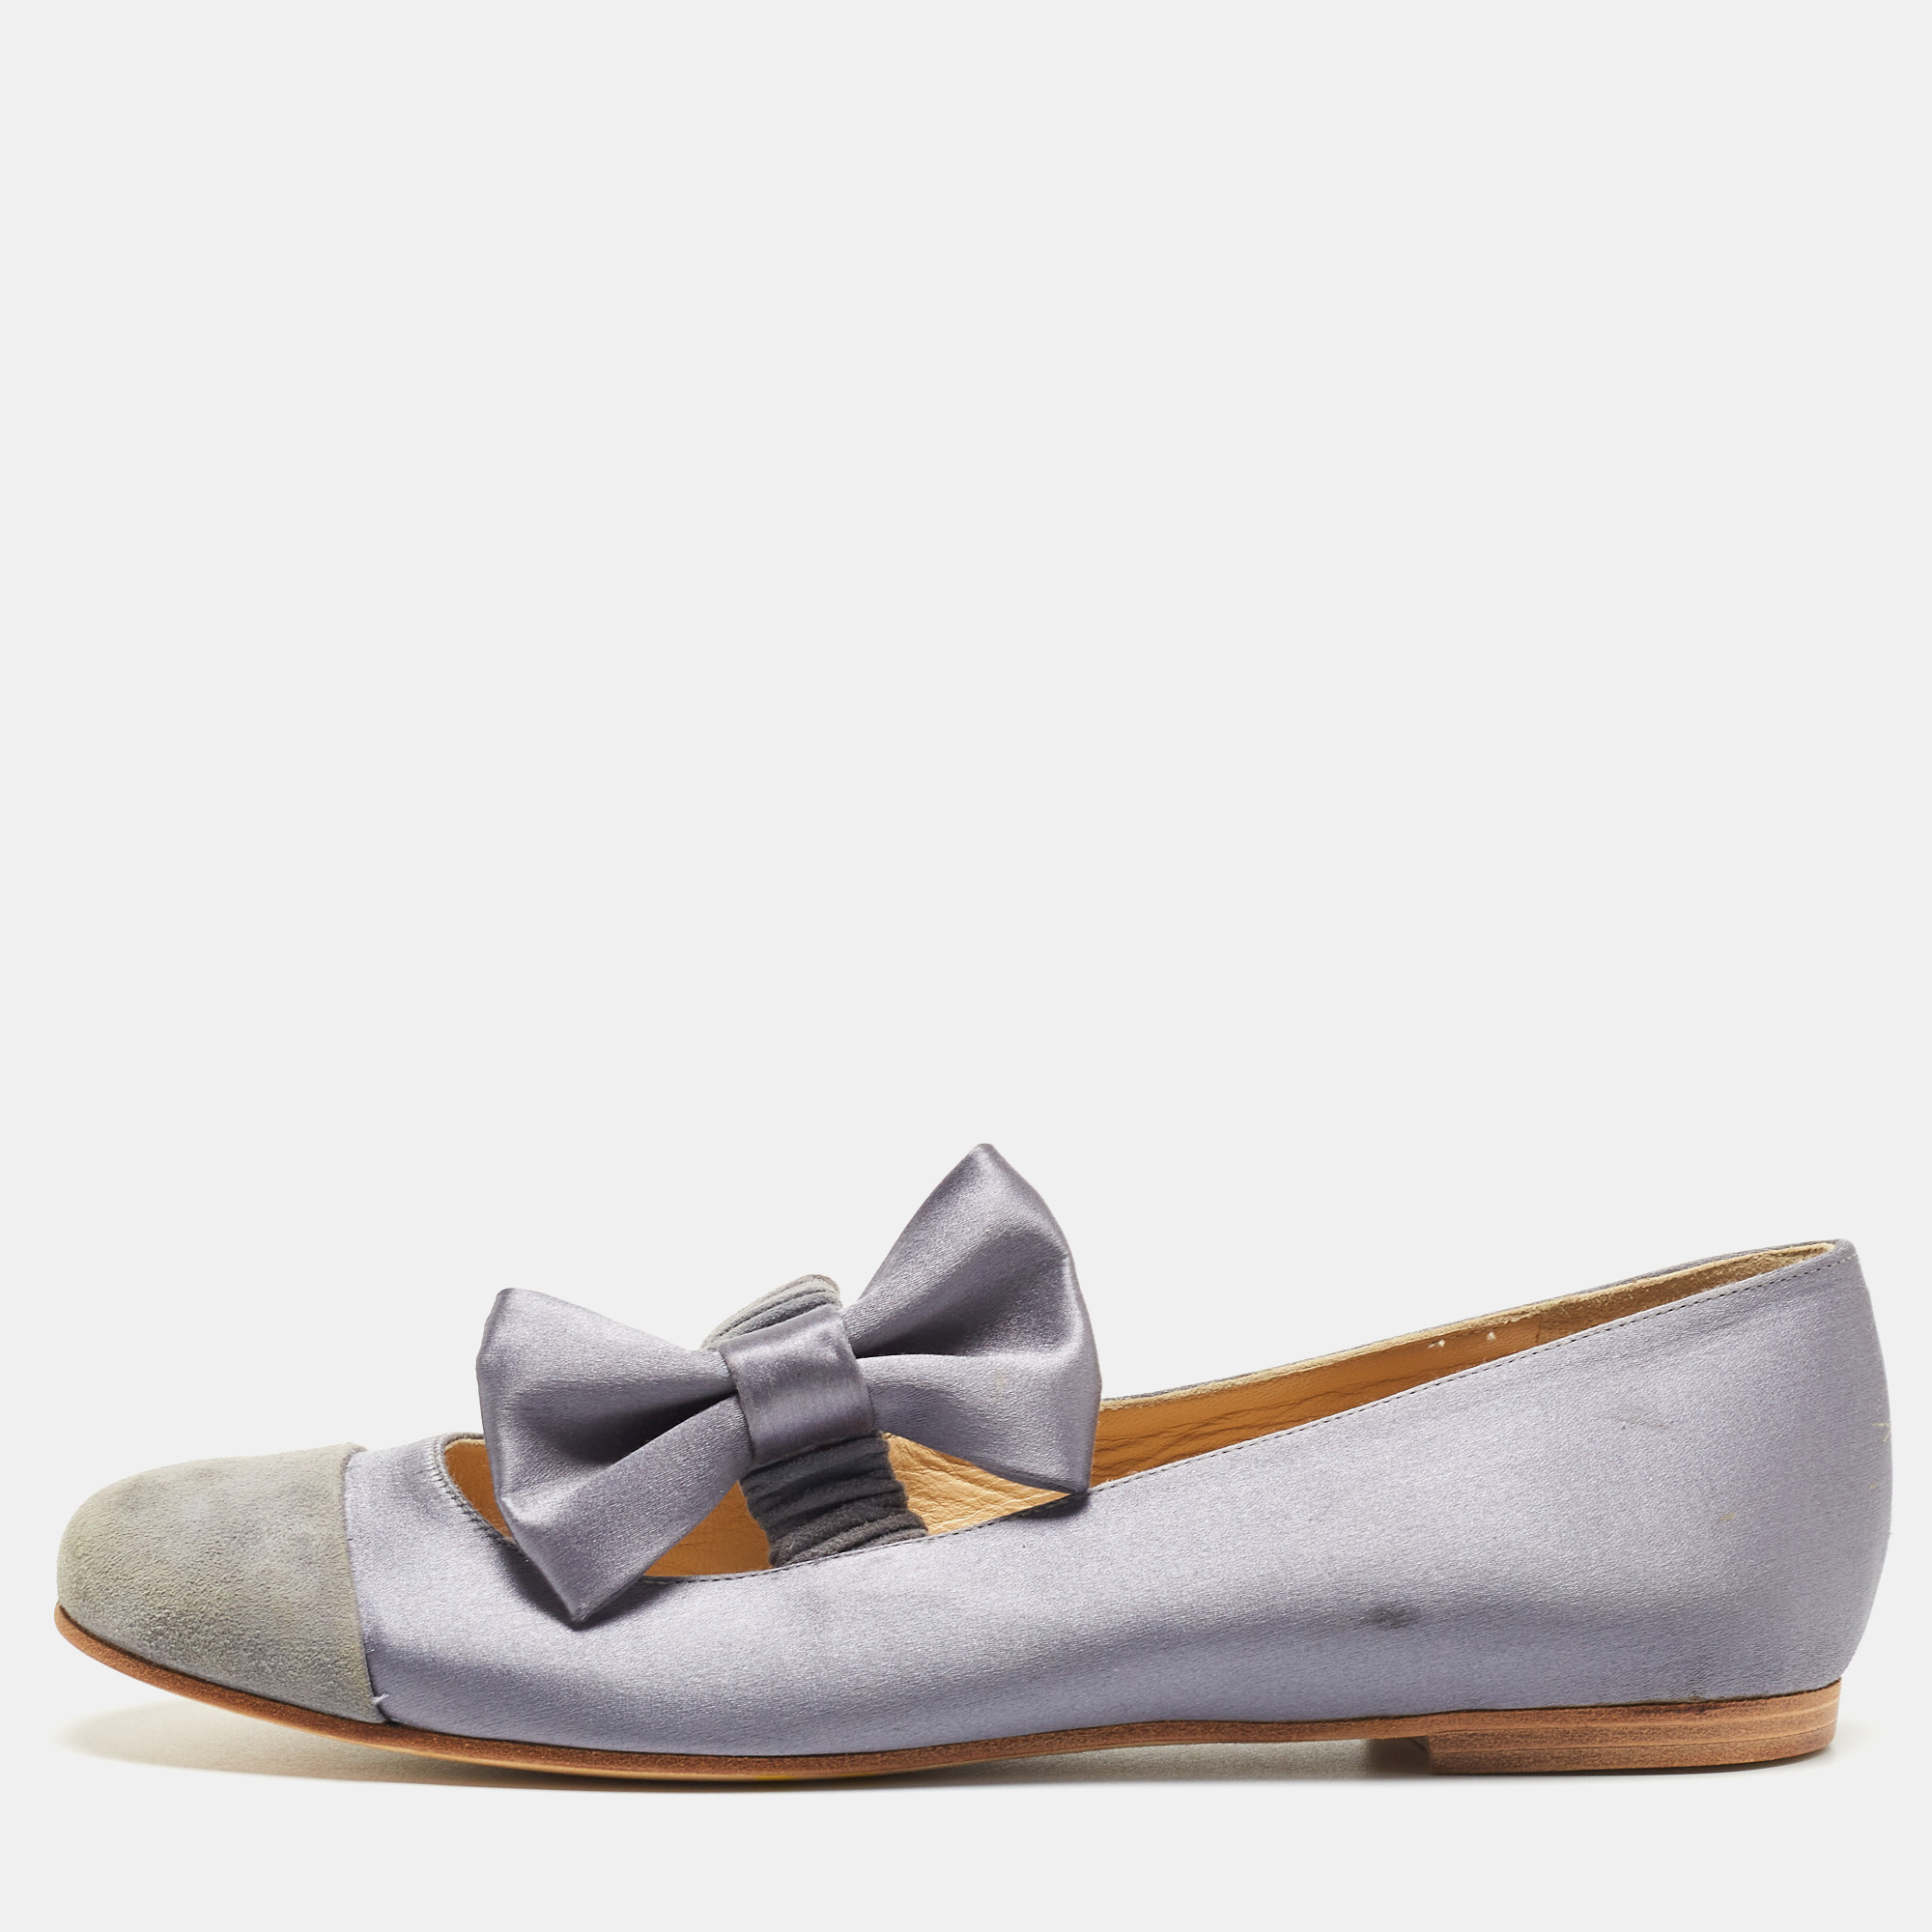 See By Chloe Grey/Blue Satin And Suede Ballet Flats Size 37